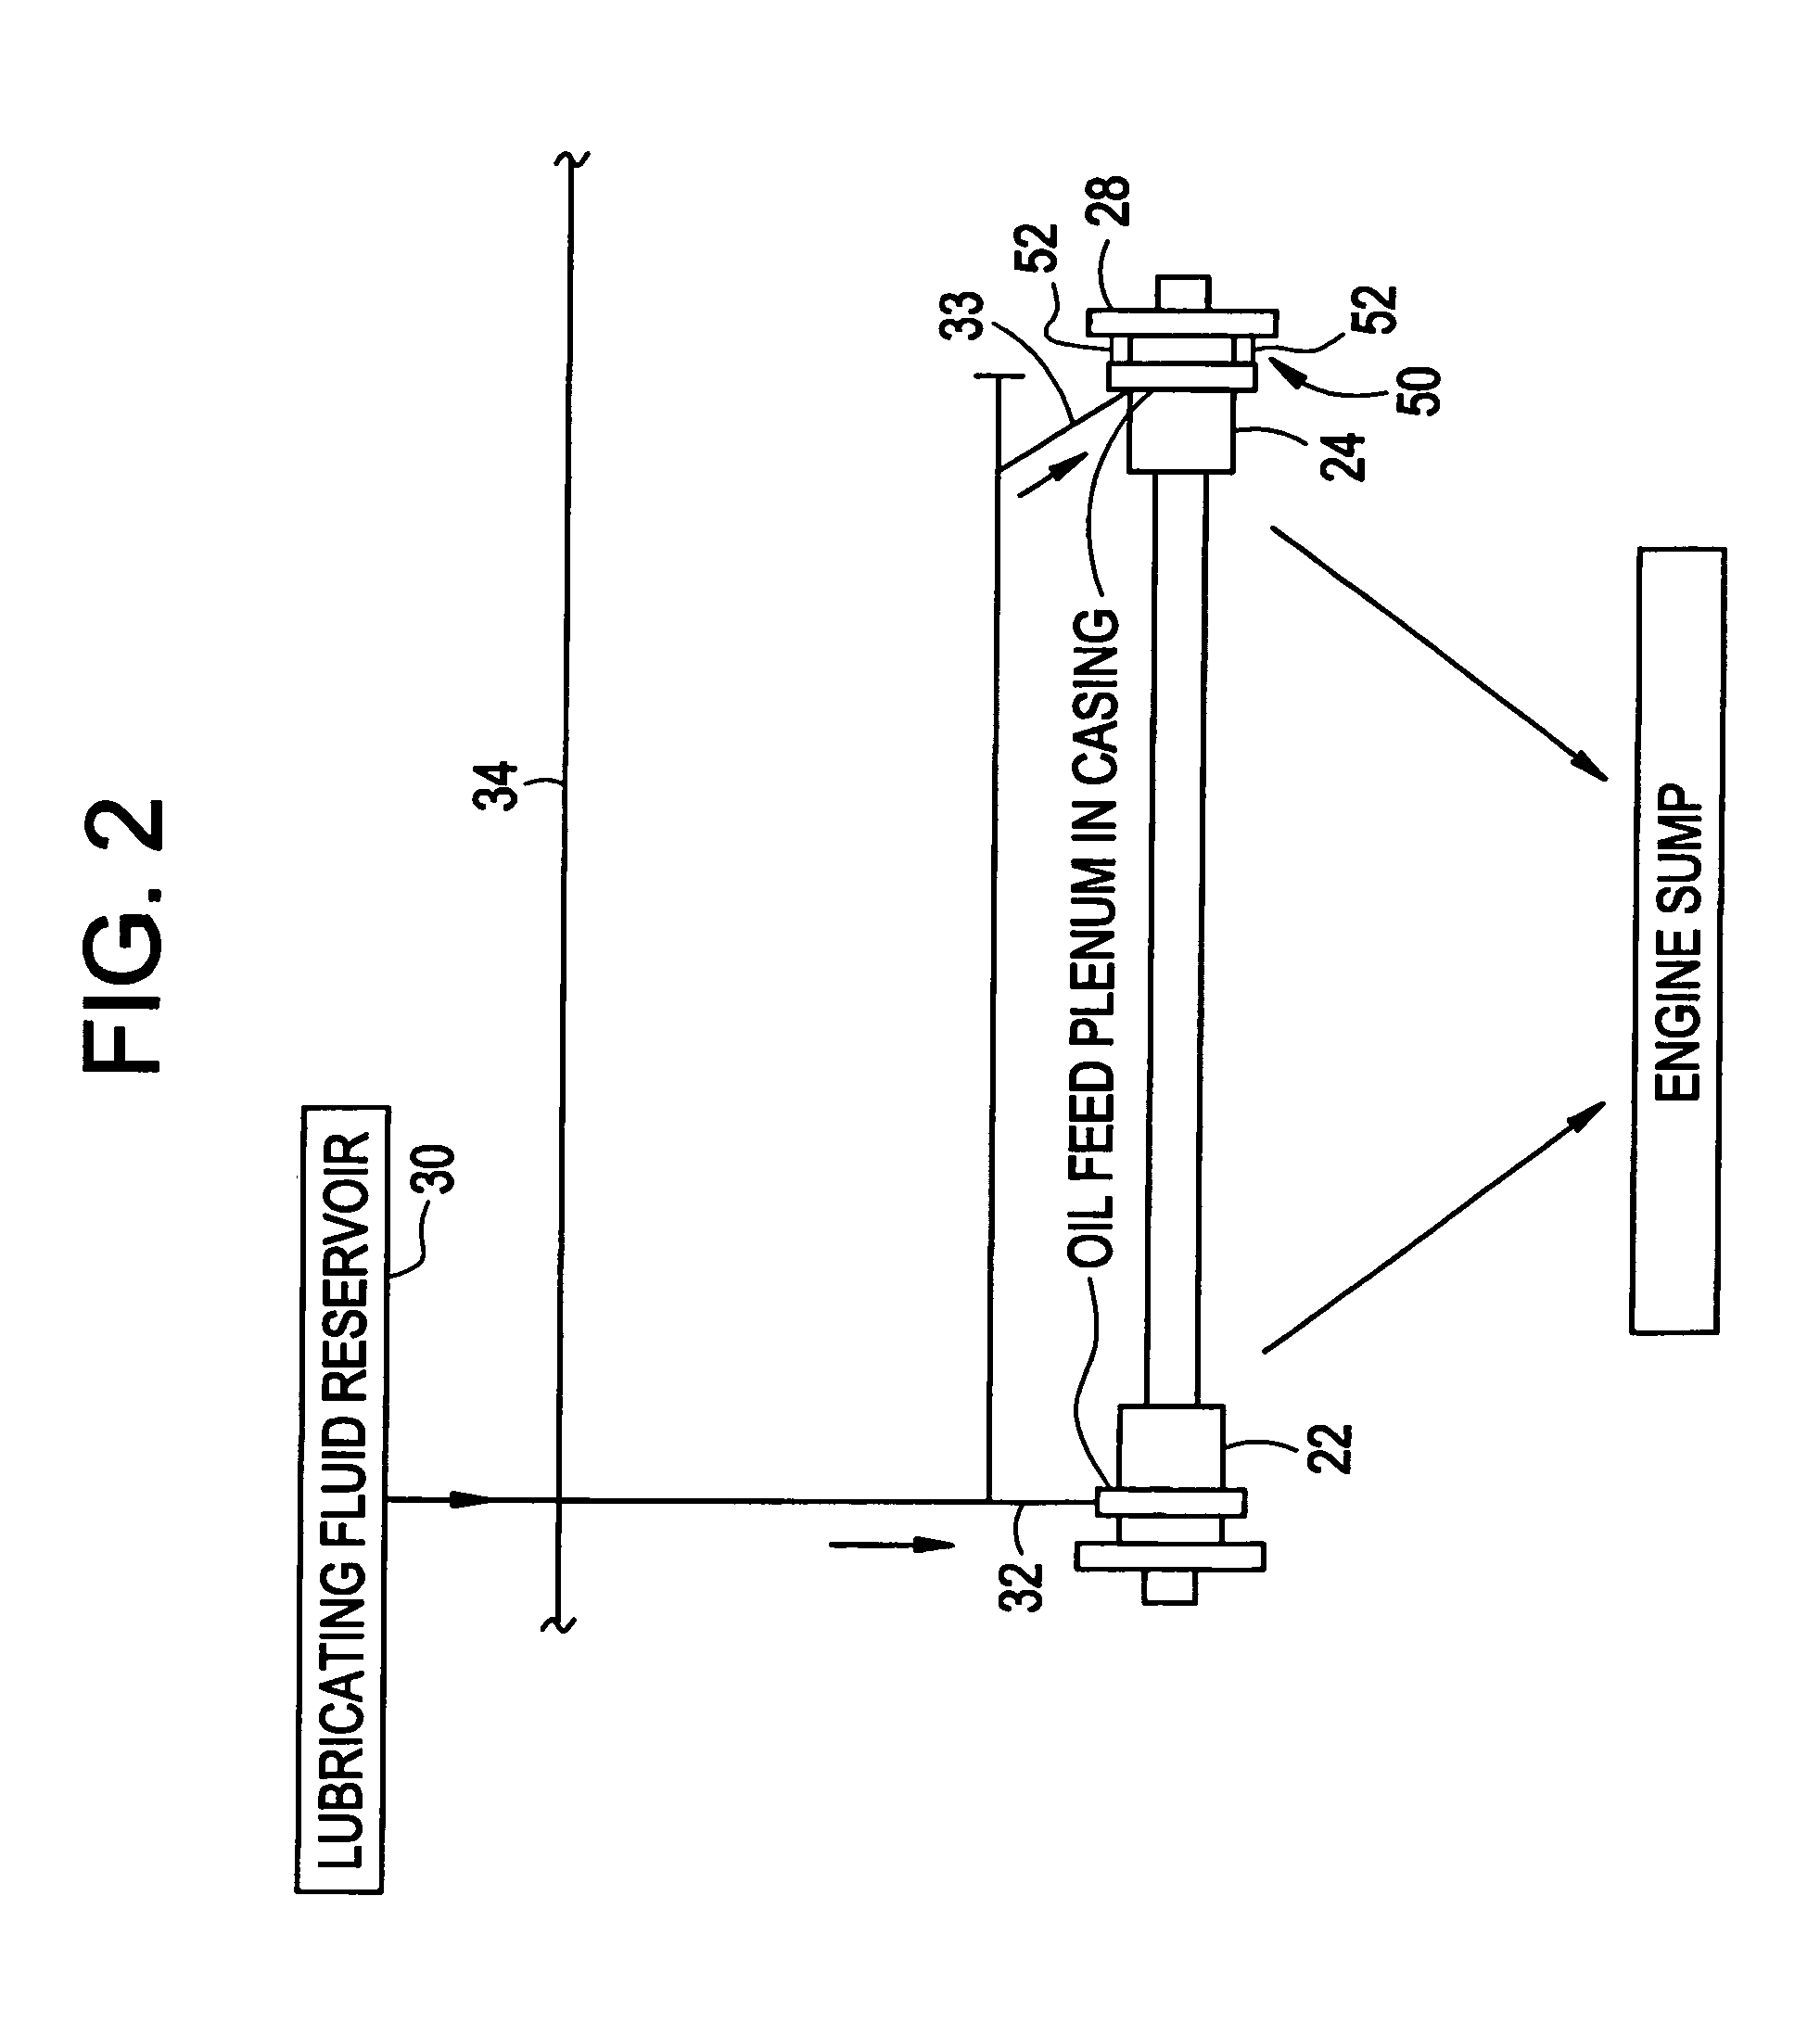 Bearing assembly with fluid circuit for delivery of lubricating fluid between bearing surfaces